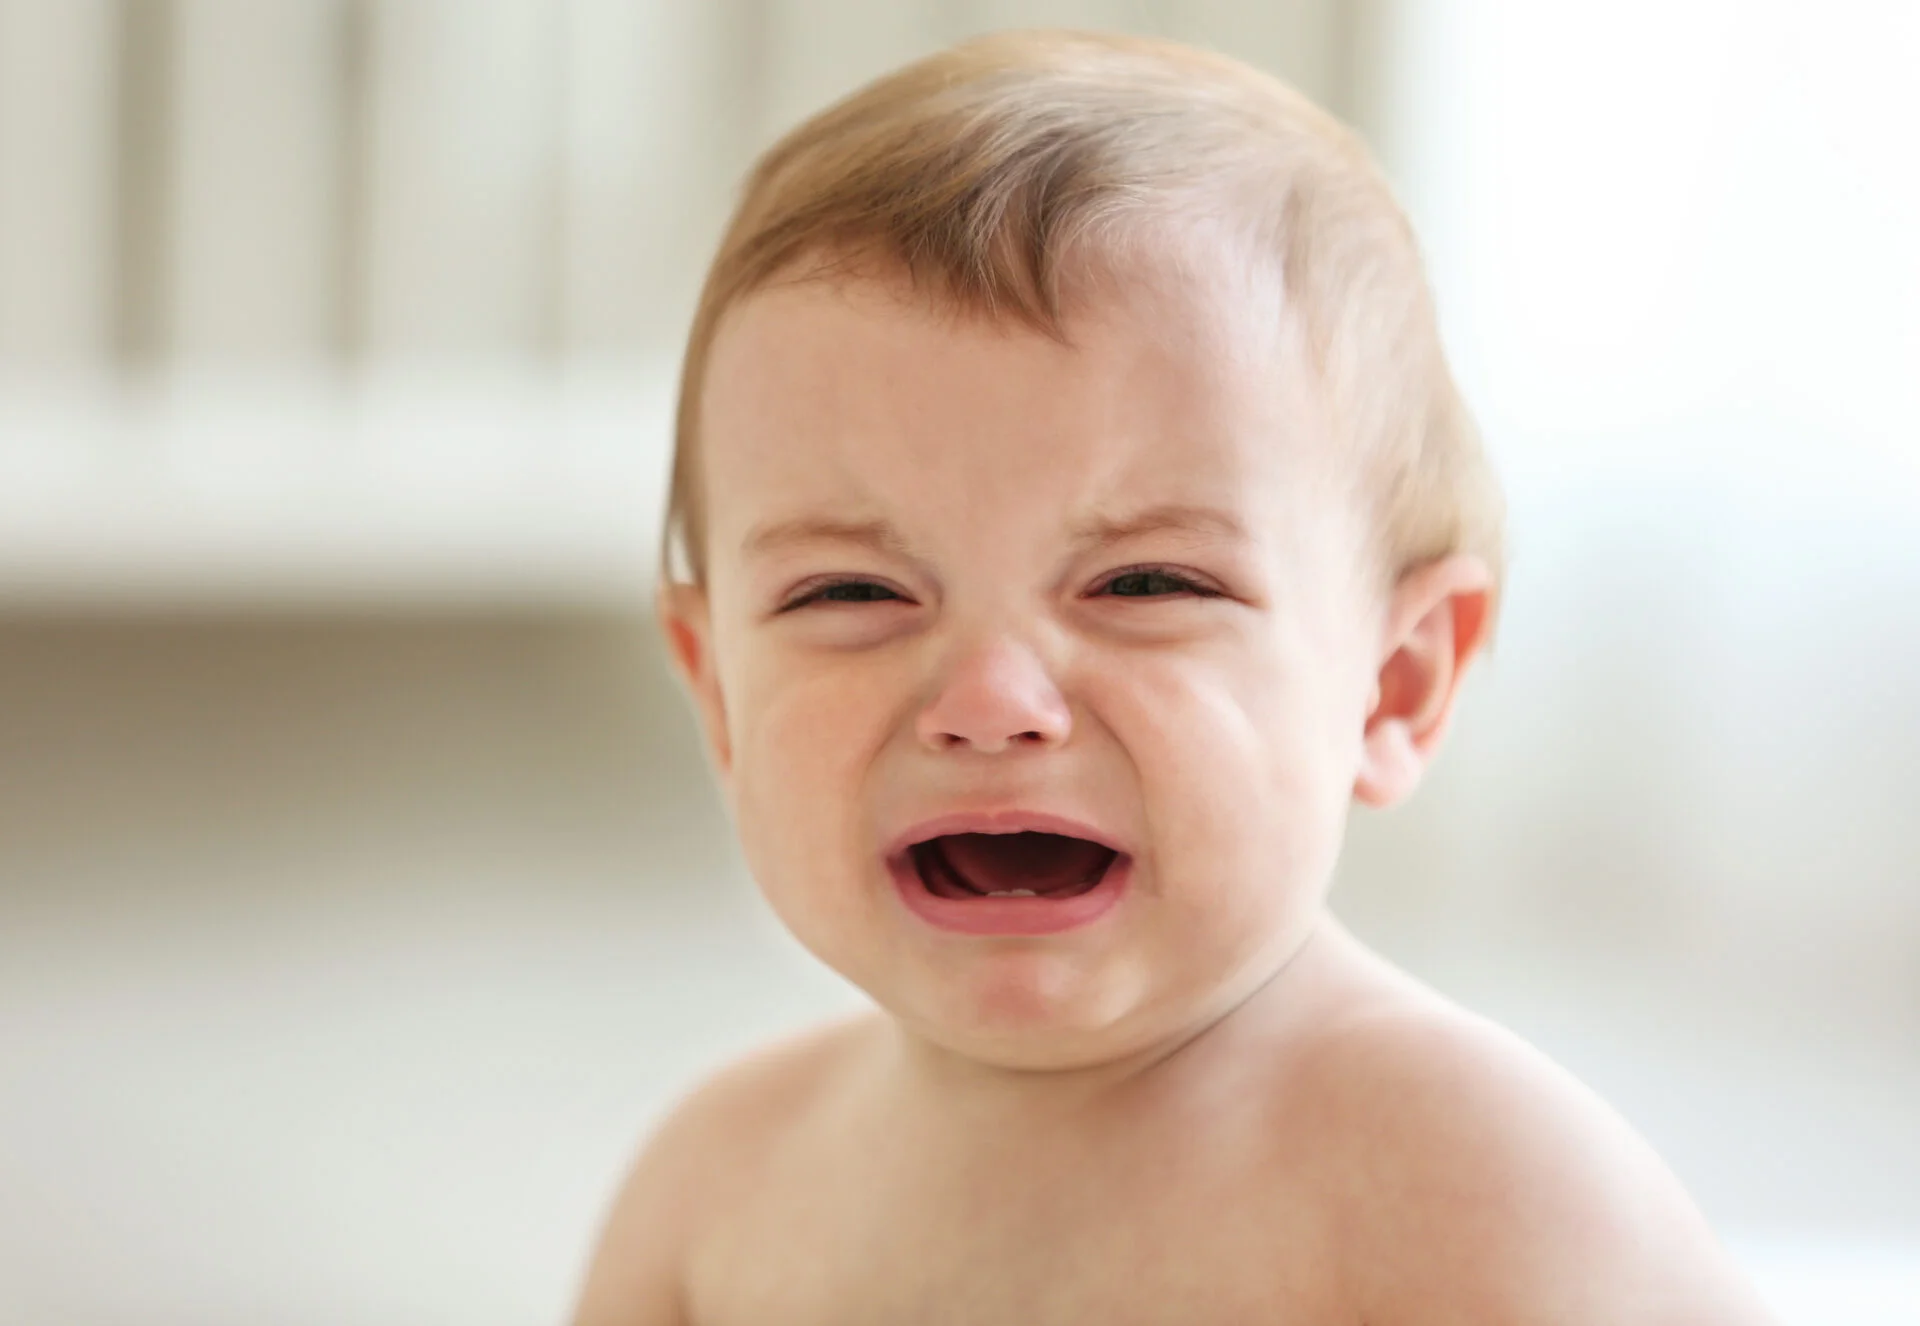 Baby crying because Nook Pure Organic Mattress was found to have PFAS